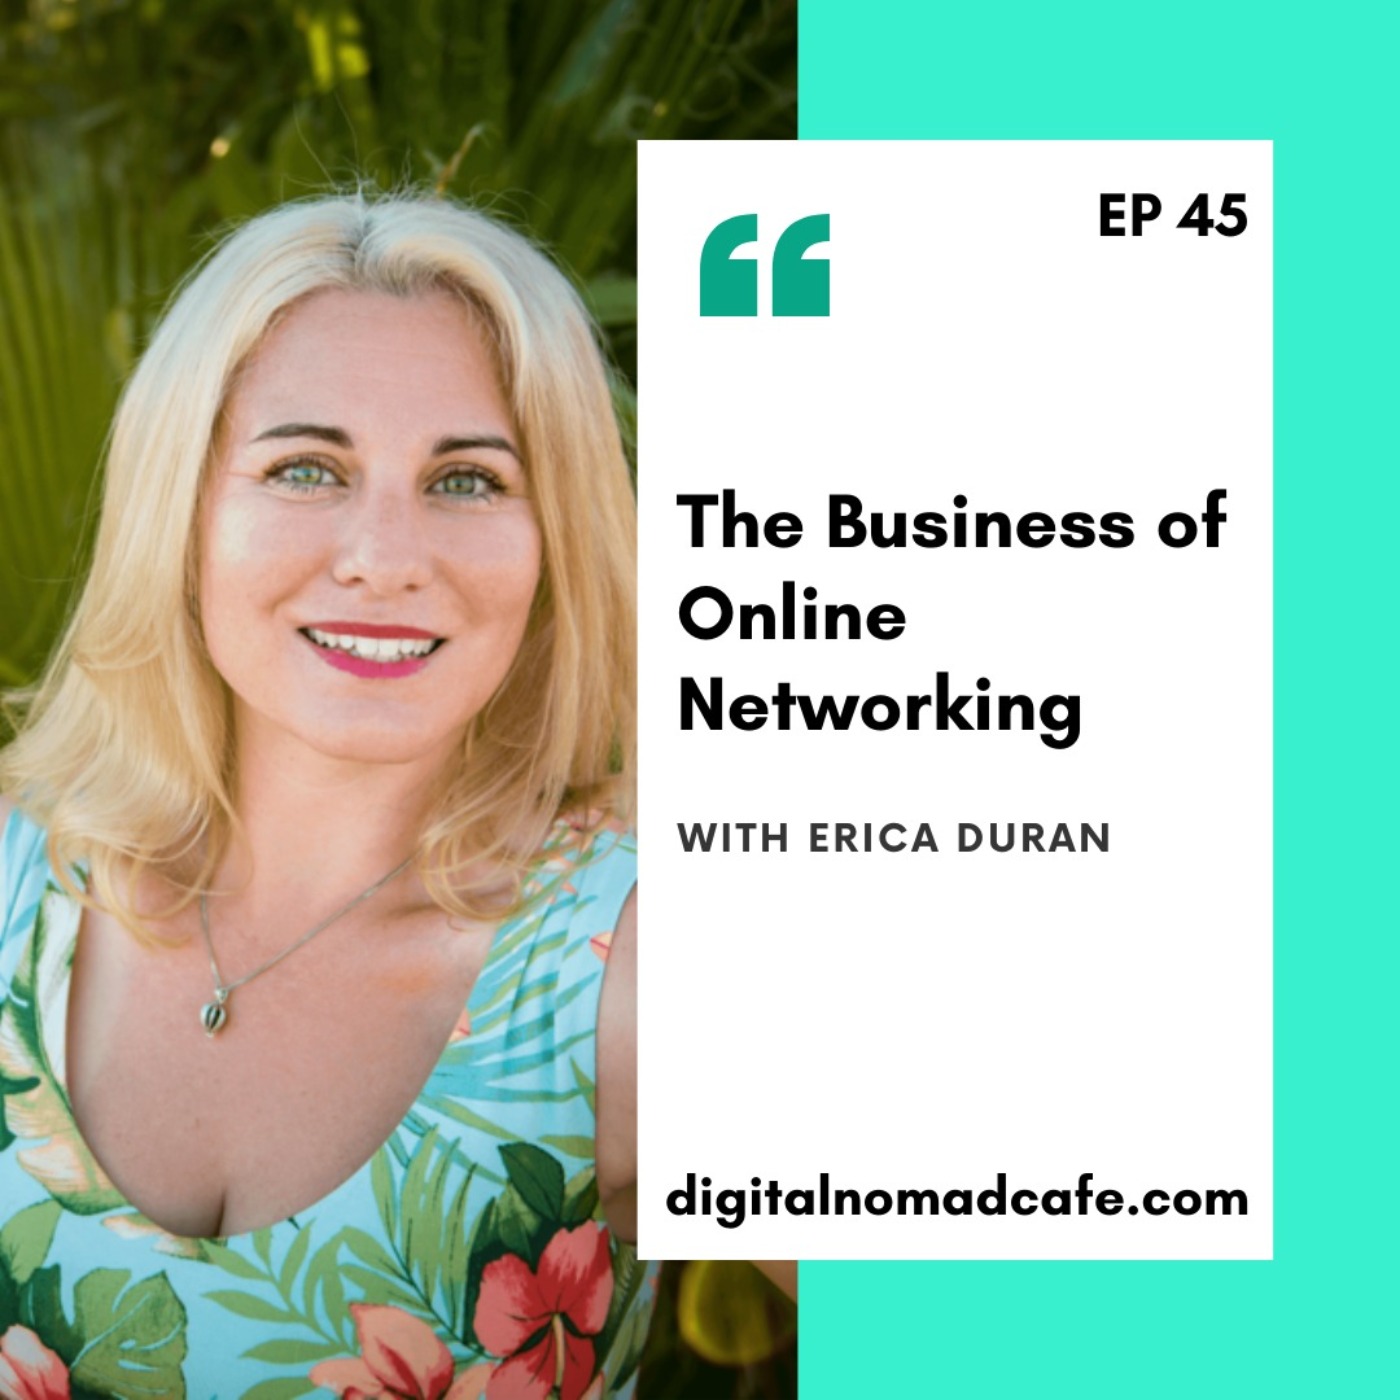 EP45- The Business of Online Networking with Erica Duran